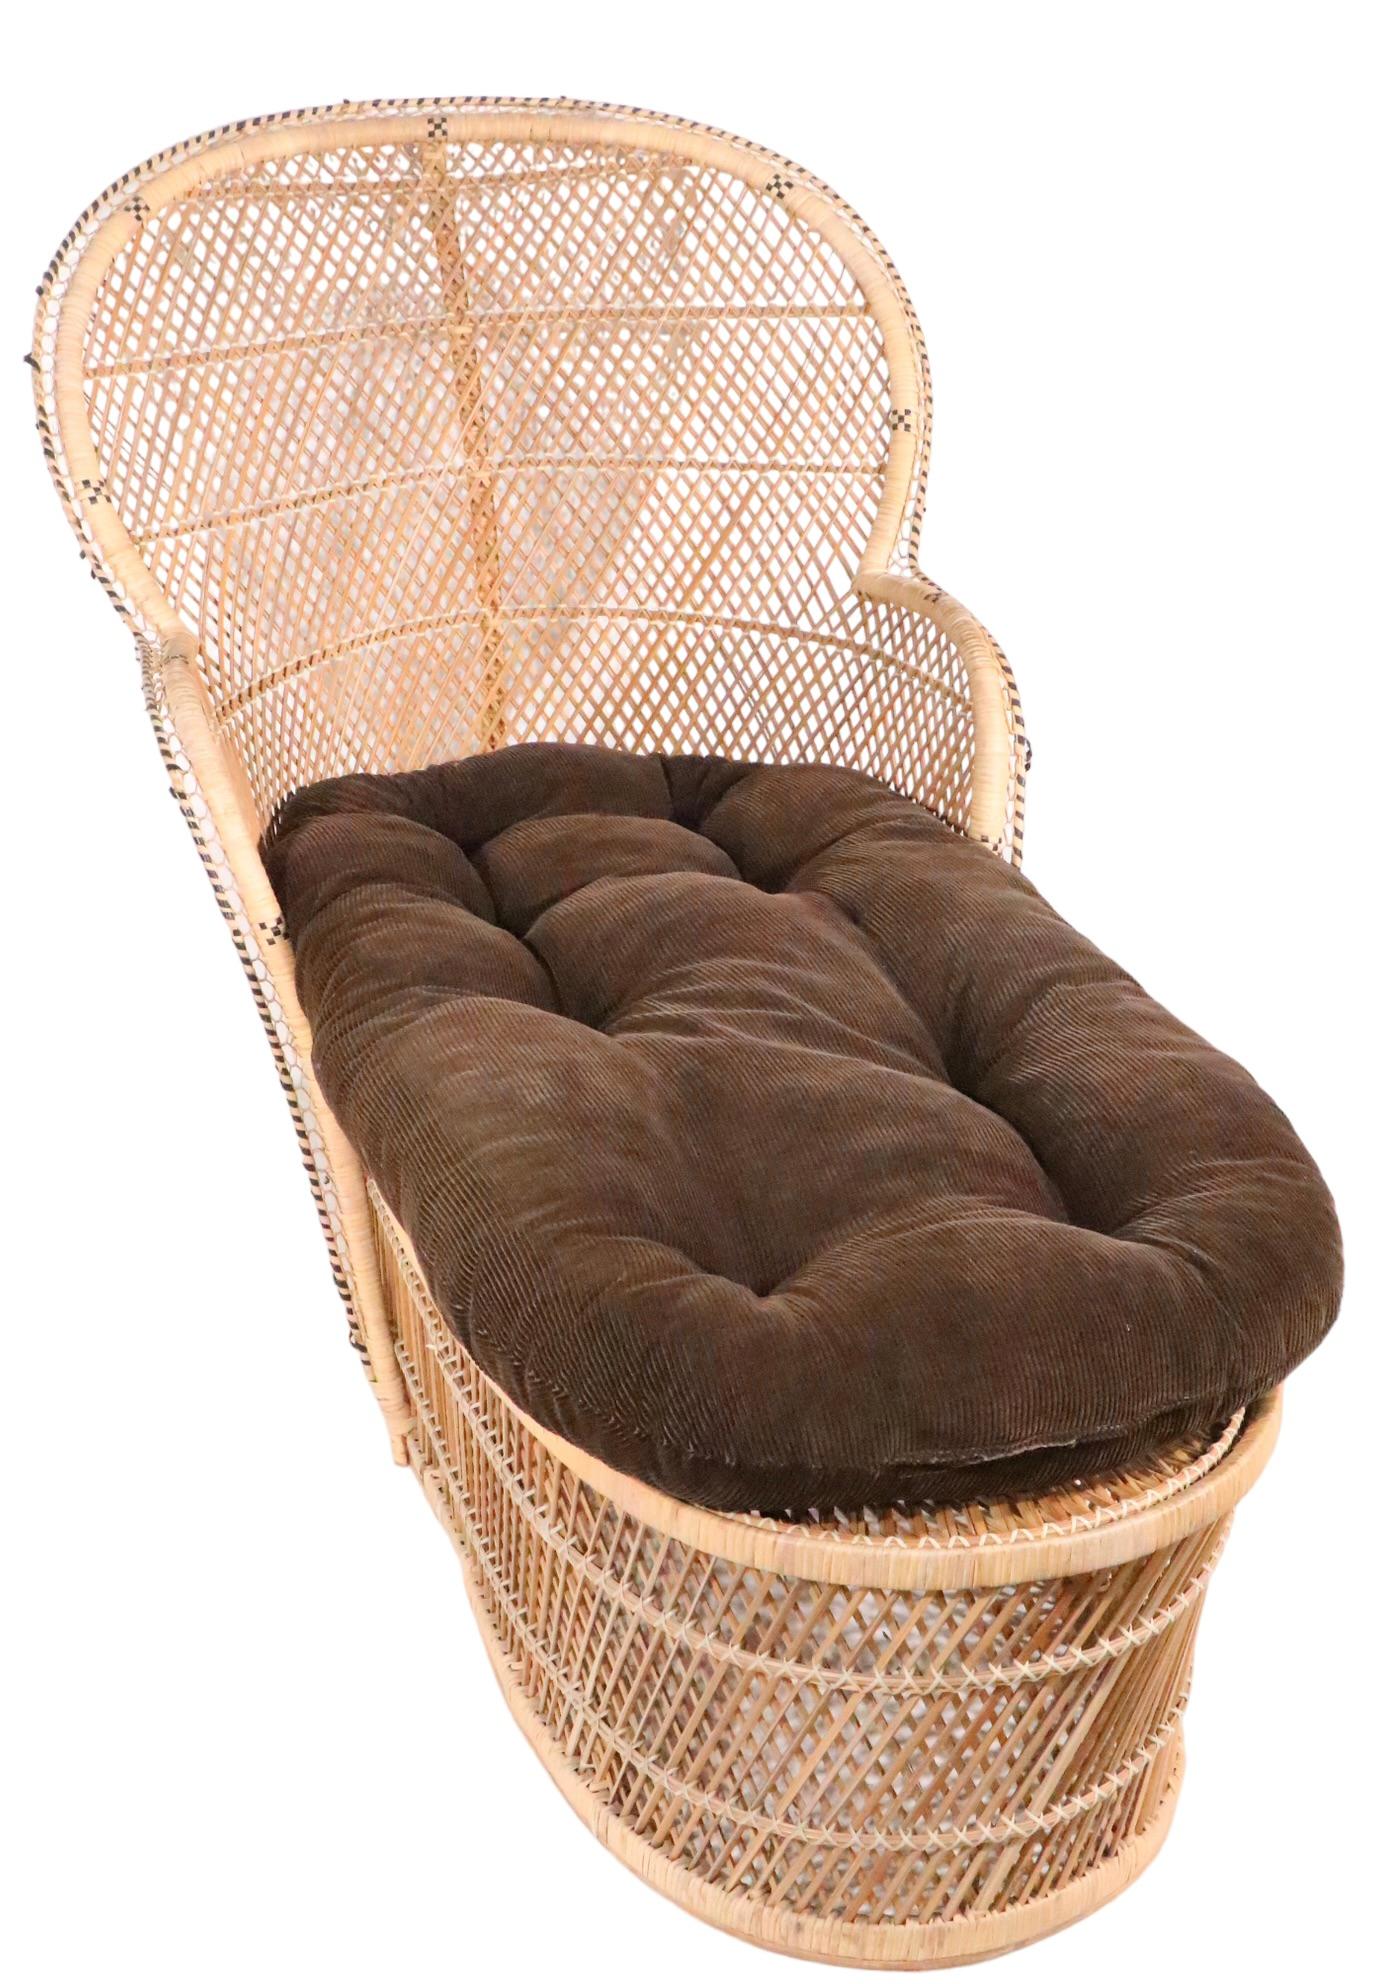 Philippine Woven Wicker Peacock Style Chaise Lounge c 1970's For Sale